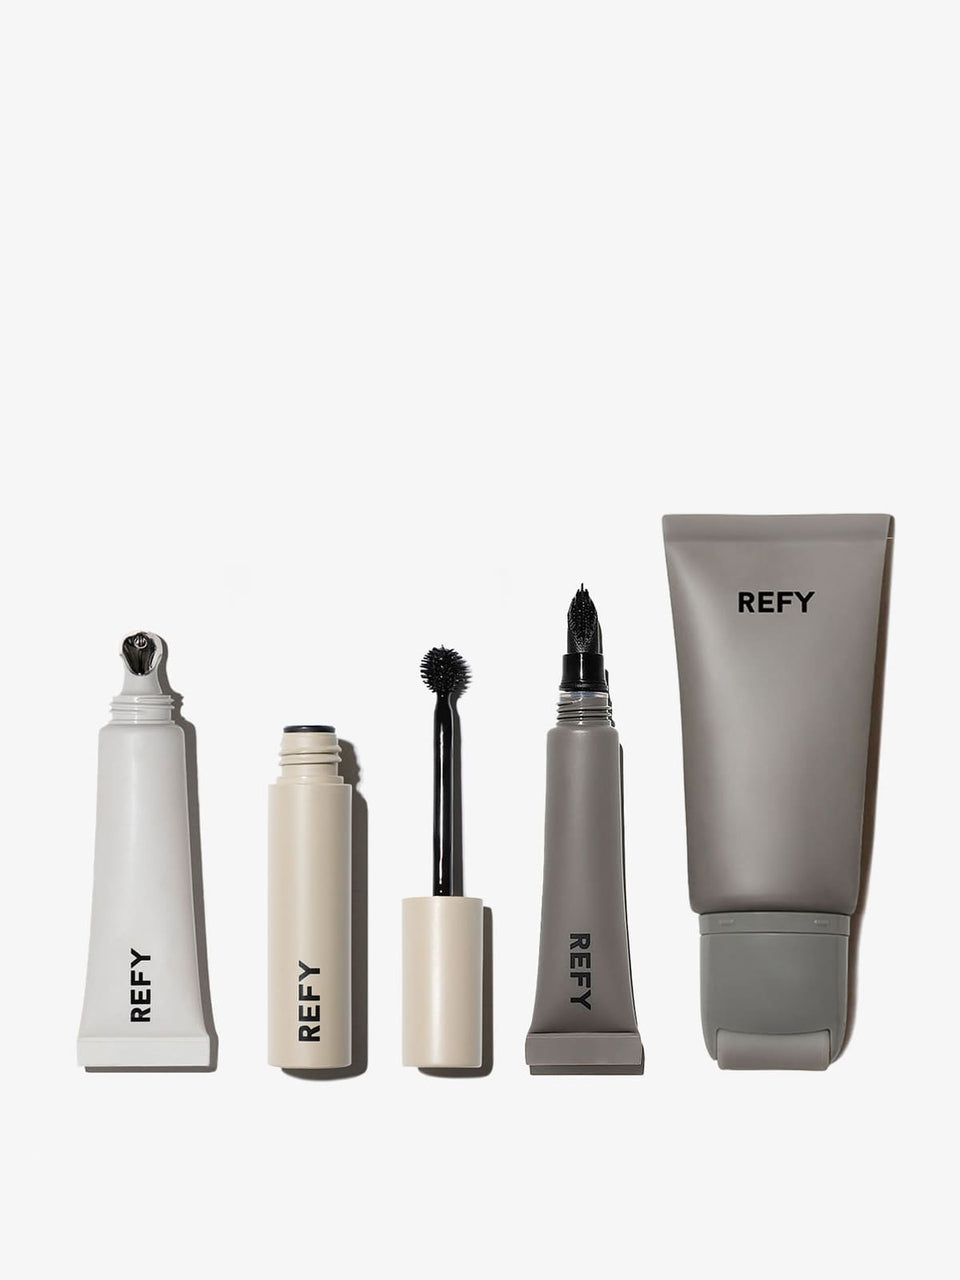 FRONT IMAGE OF REFY EVERYDAY ESSENTIALS SET. CONTAINS LIP GLOSS IN CLEAR, BROW TINT, LIP BUFF + FACE PRIMER